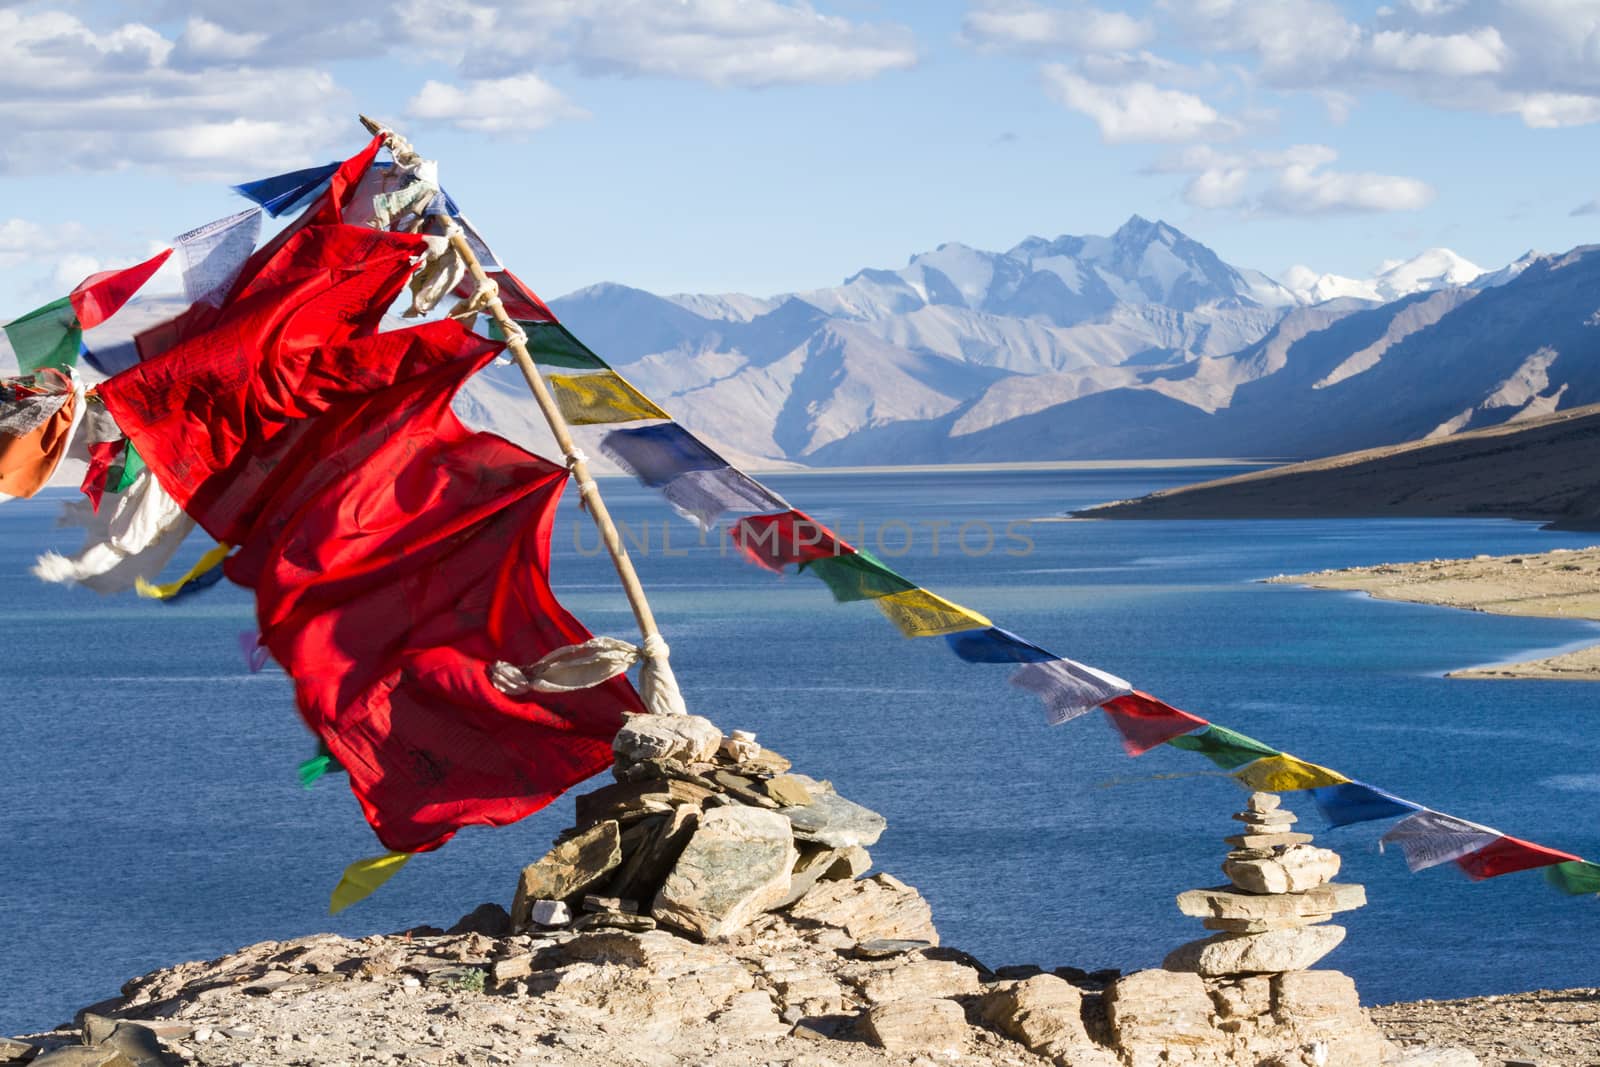 Buddhist prayer flags on the wind against the blue lake, mountains and sky (Ladakh, India)